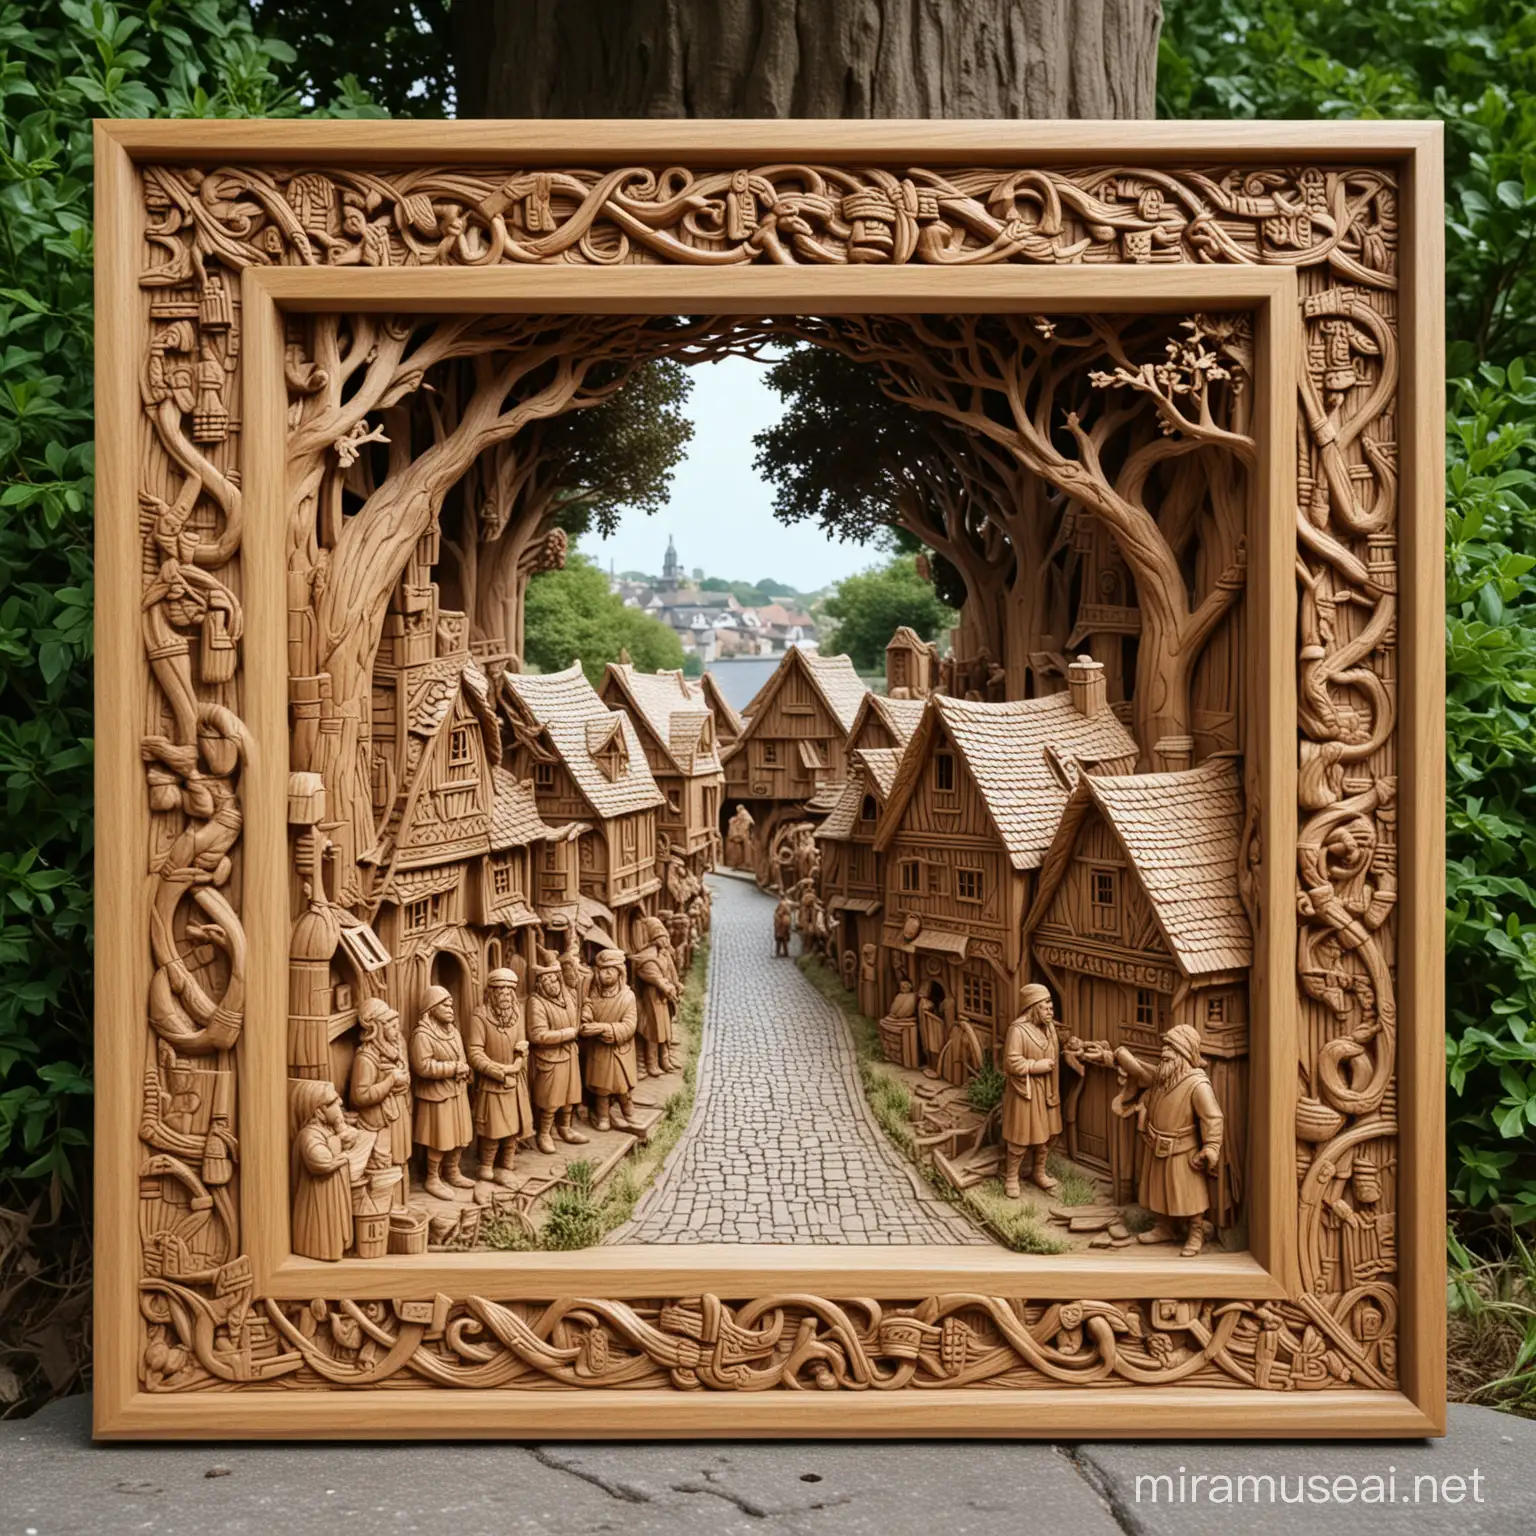 Viking village 3D carved in oak with locals talking on the street in an oak celtic inspired frame